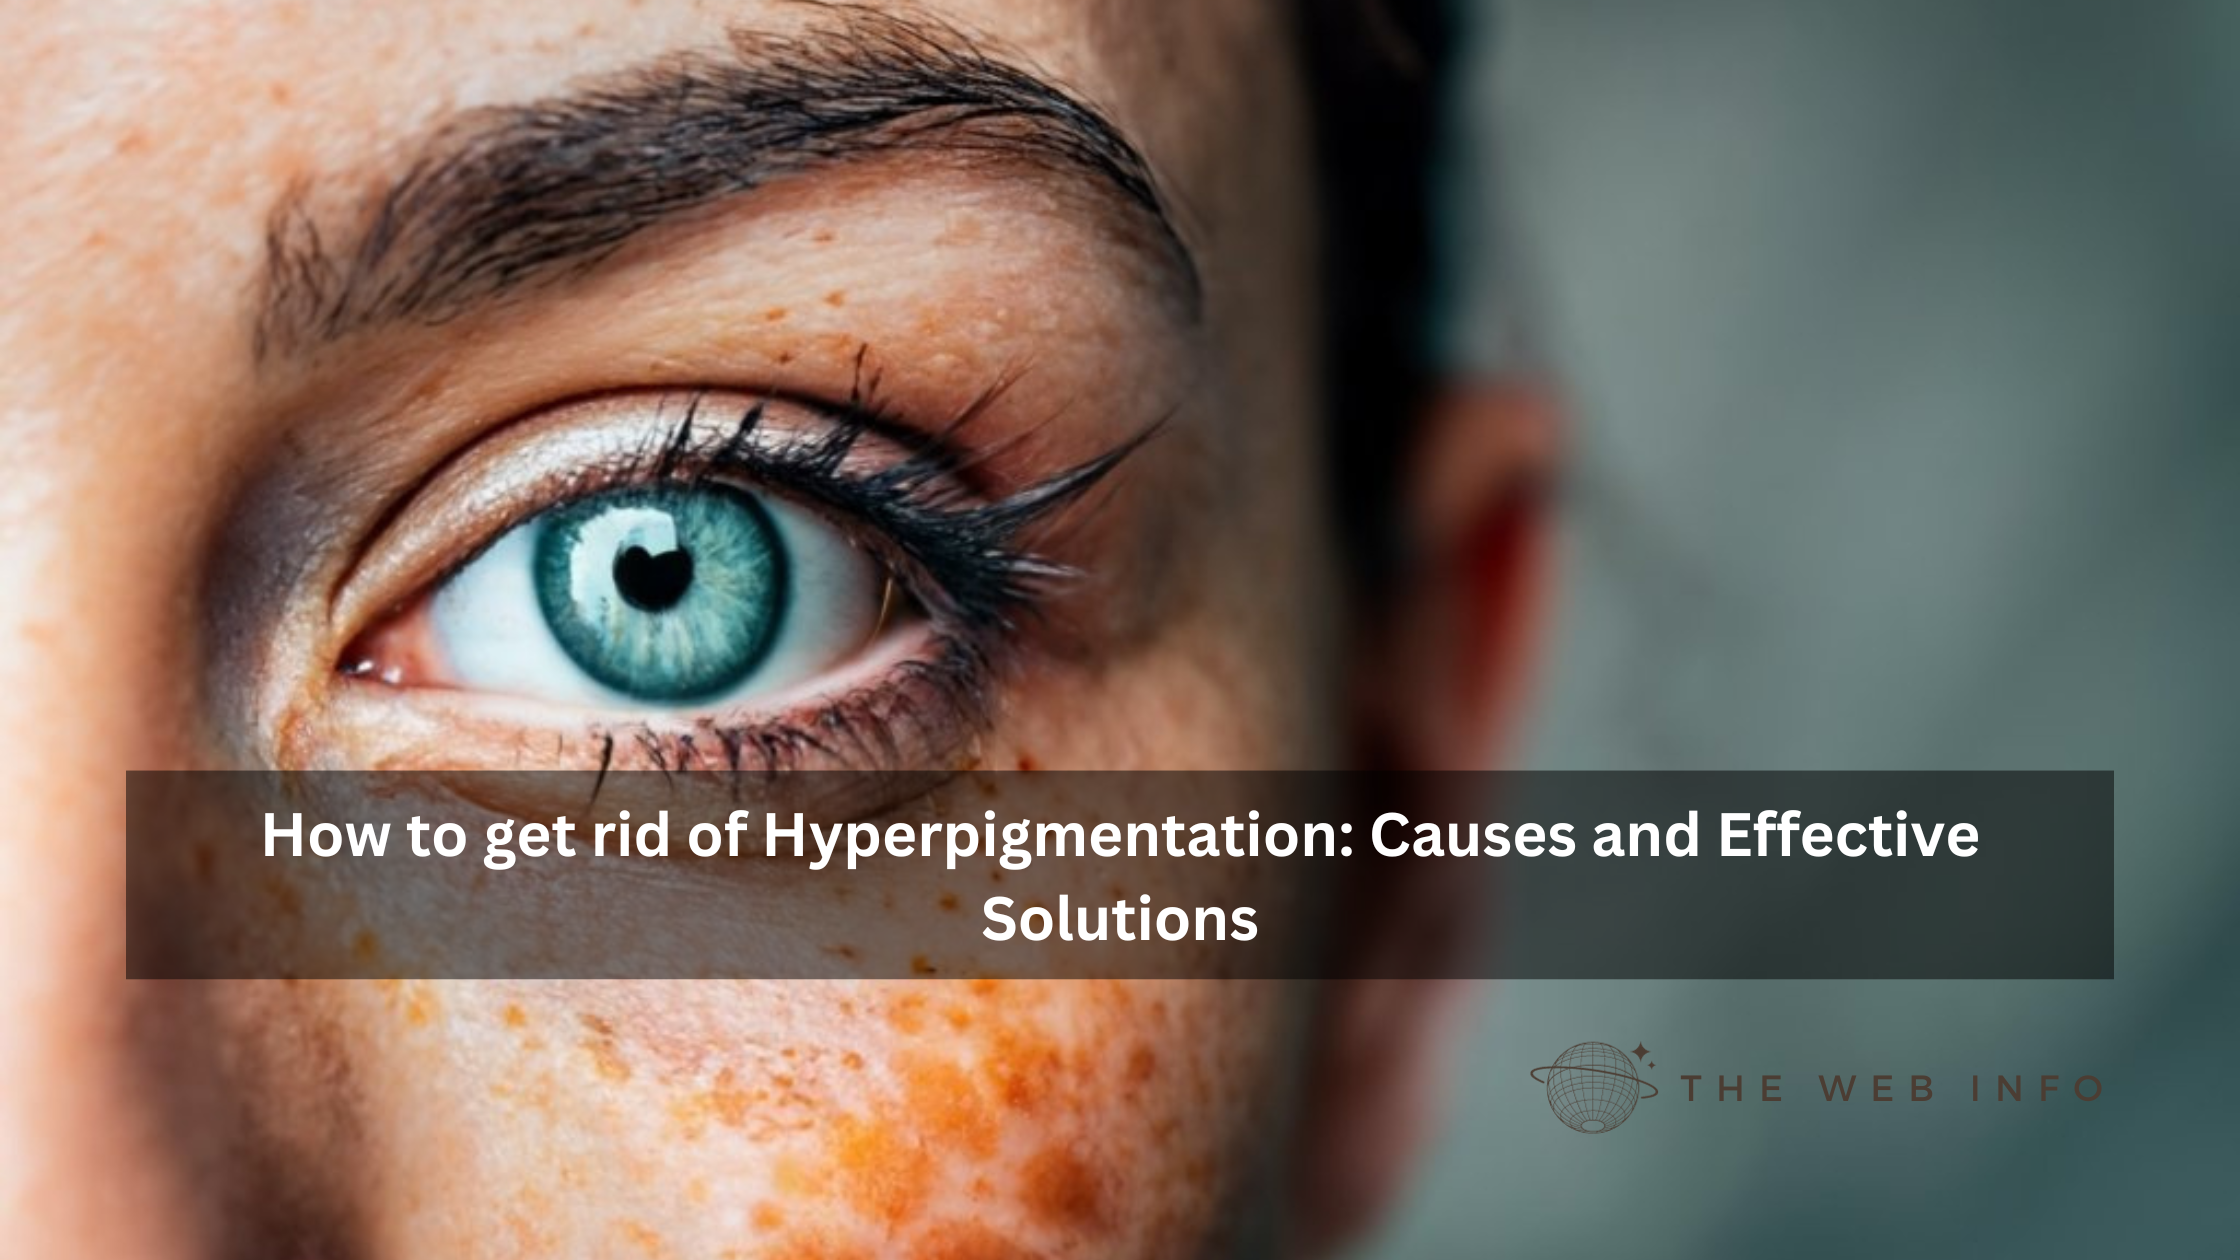 How to get rid of Hyperpigmentation: Causes and Effective Solutions